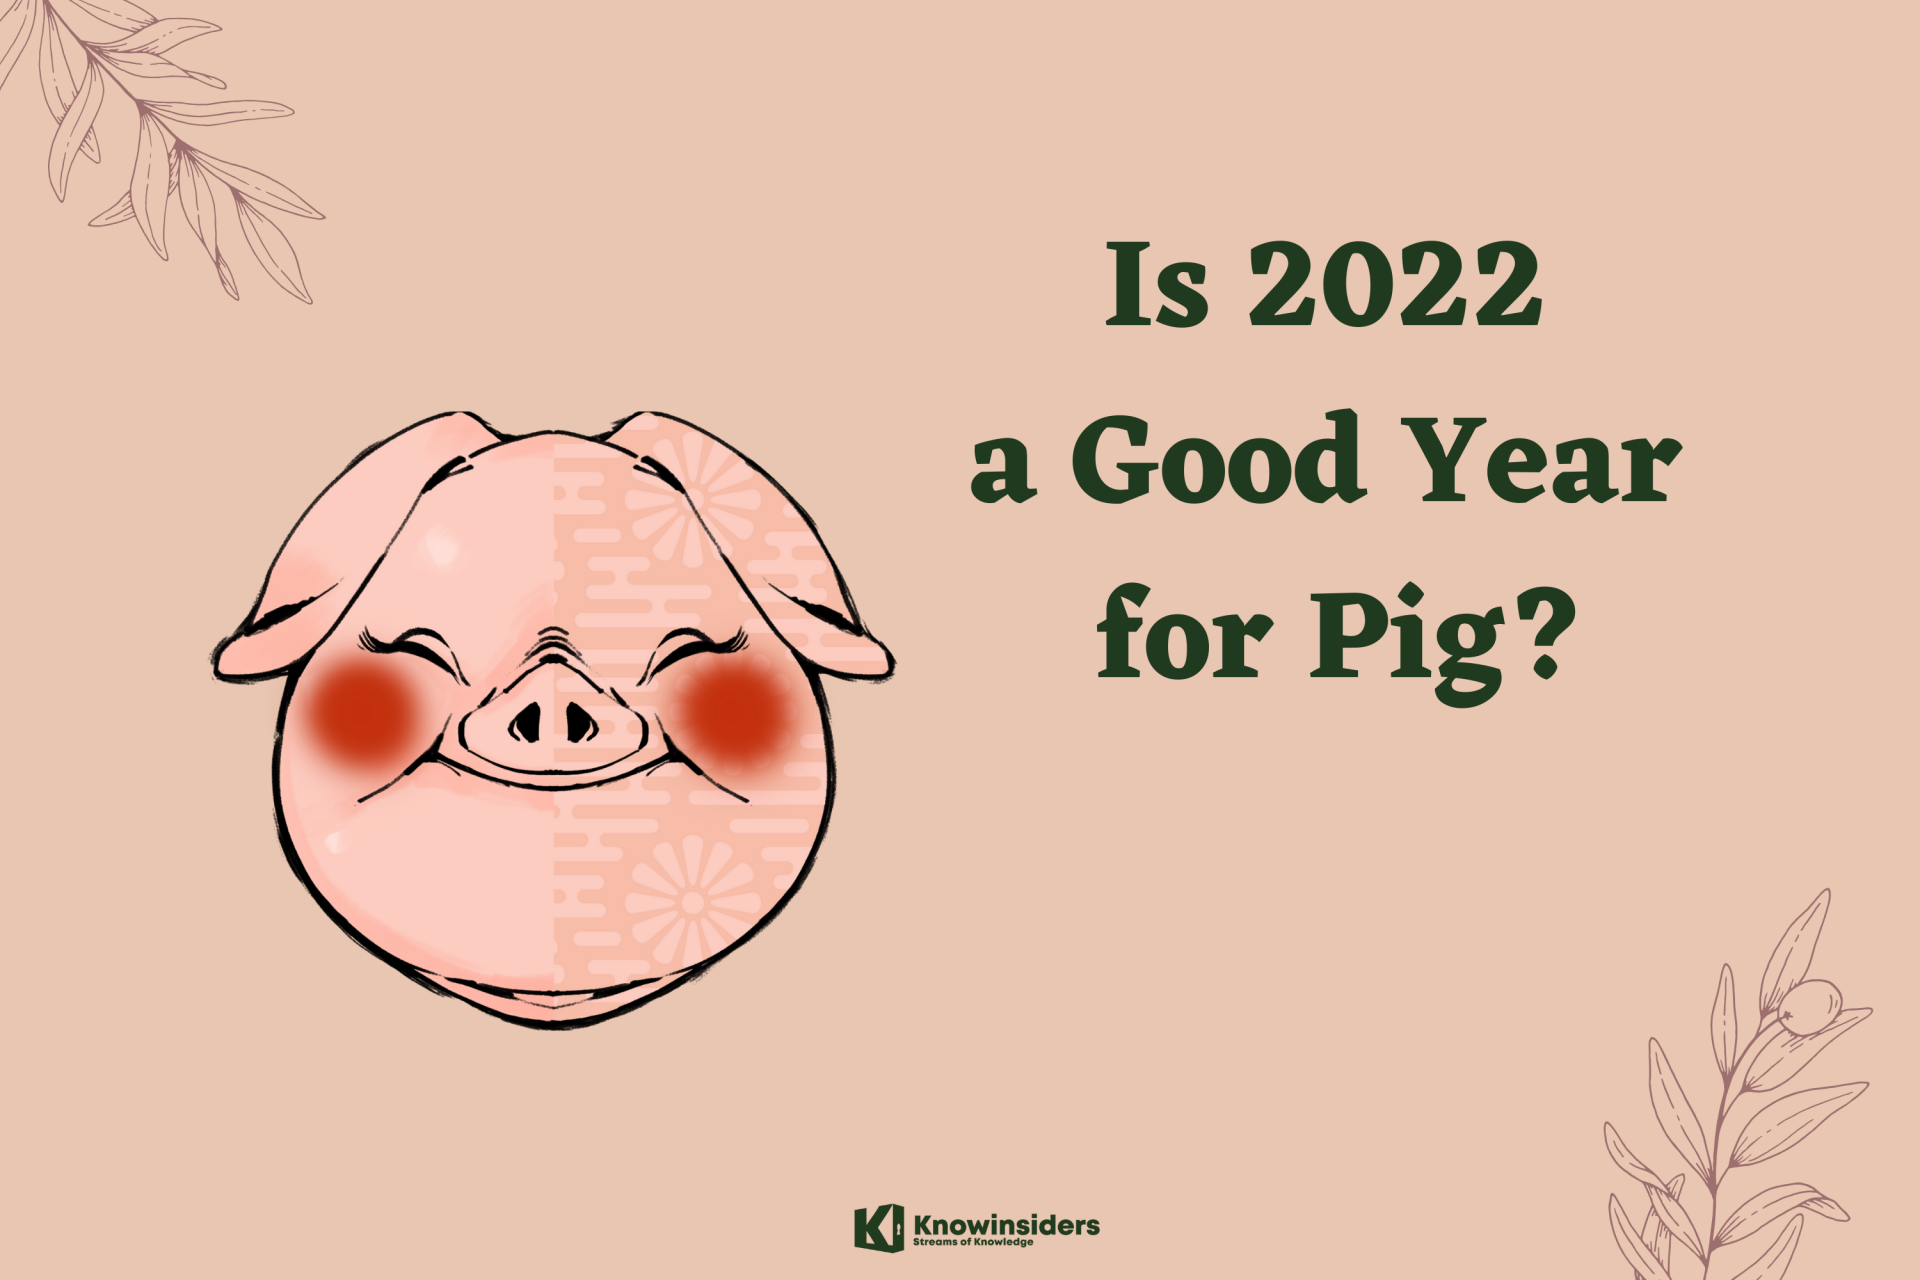 Is 2022 A Good Year for Pig?